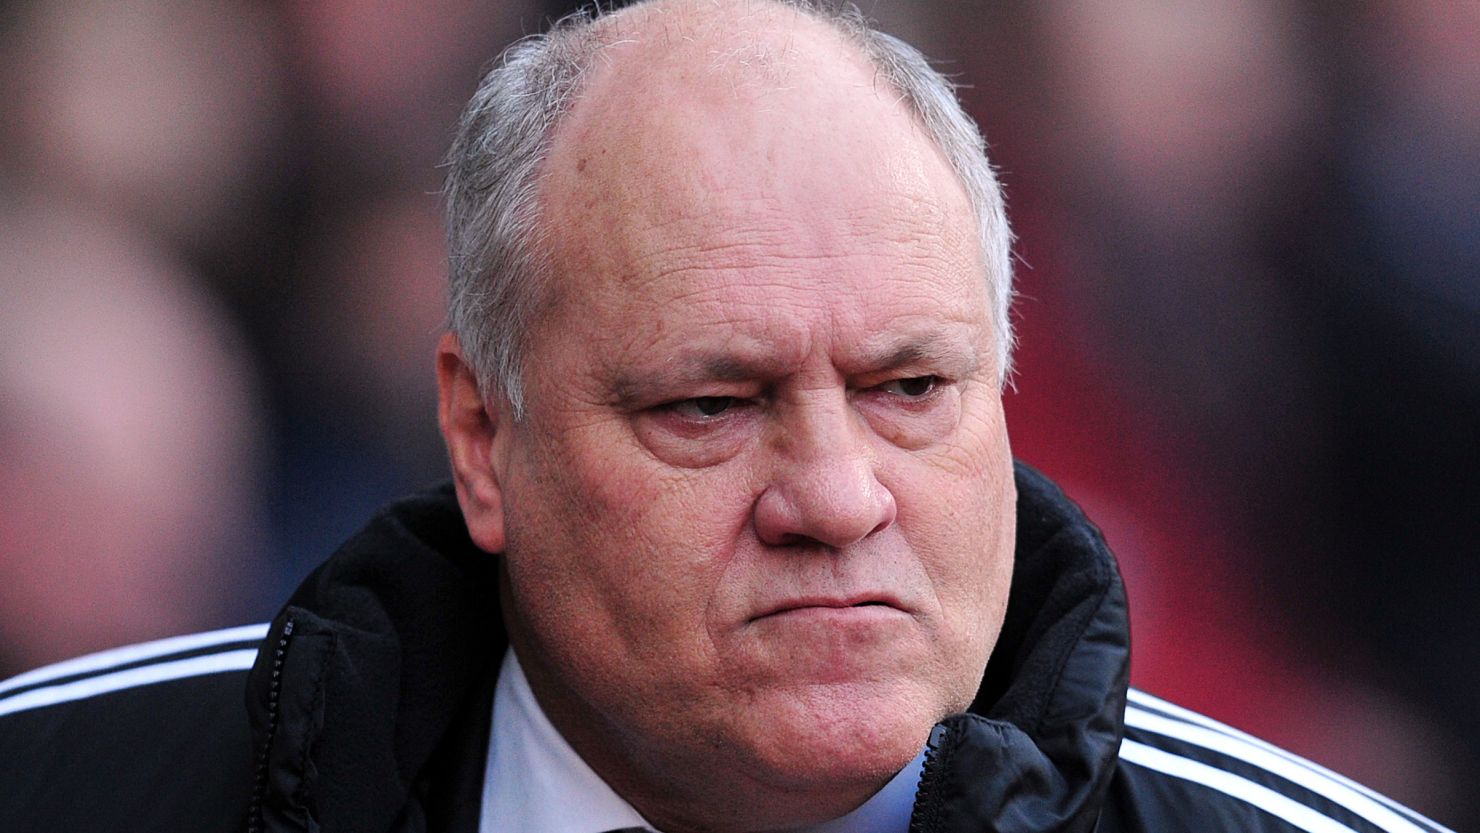 Martin Jol cut a disconsolate figure during Fulham's 3-0 defeat to West Ham in the English Premier League - his last game in charge.  